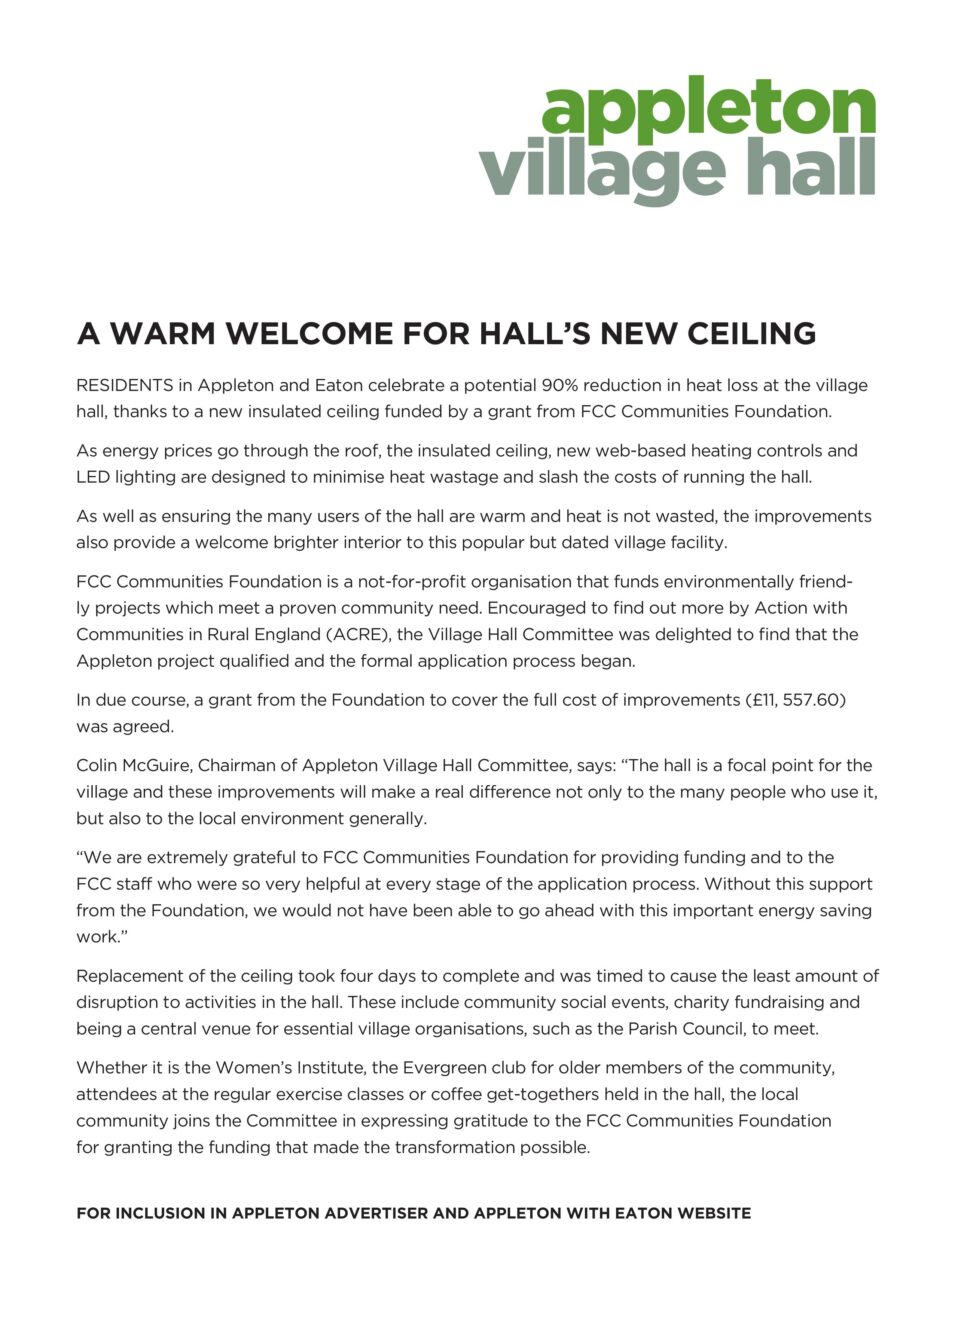 Press release about the Village HAll new insulated roof